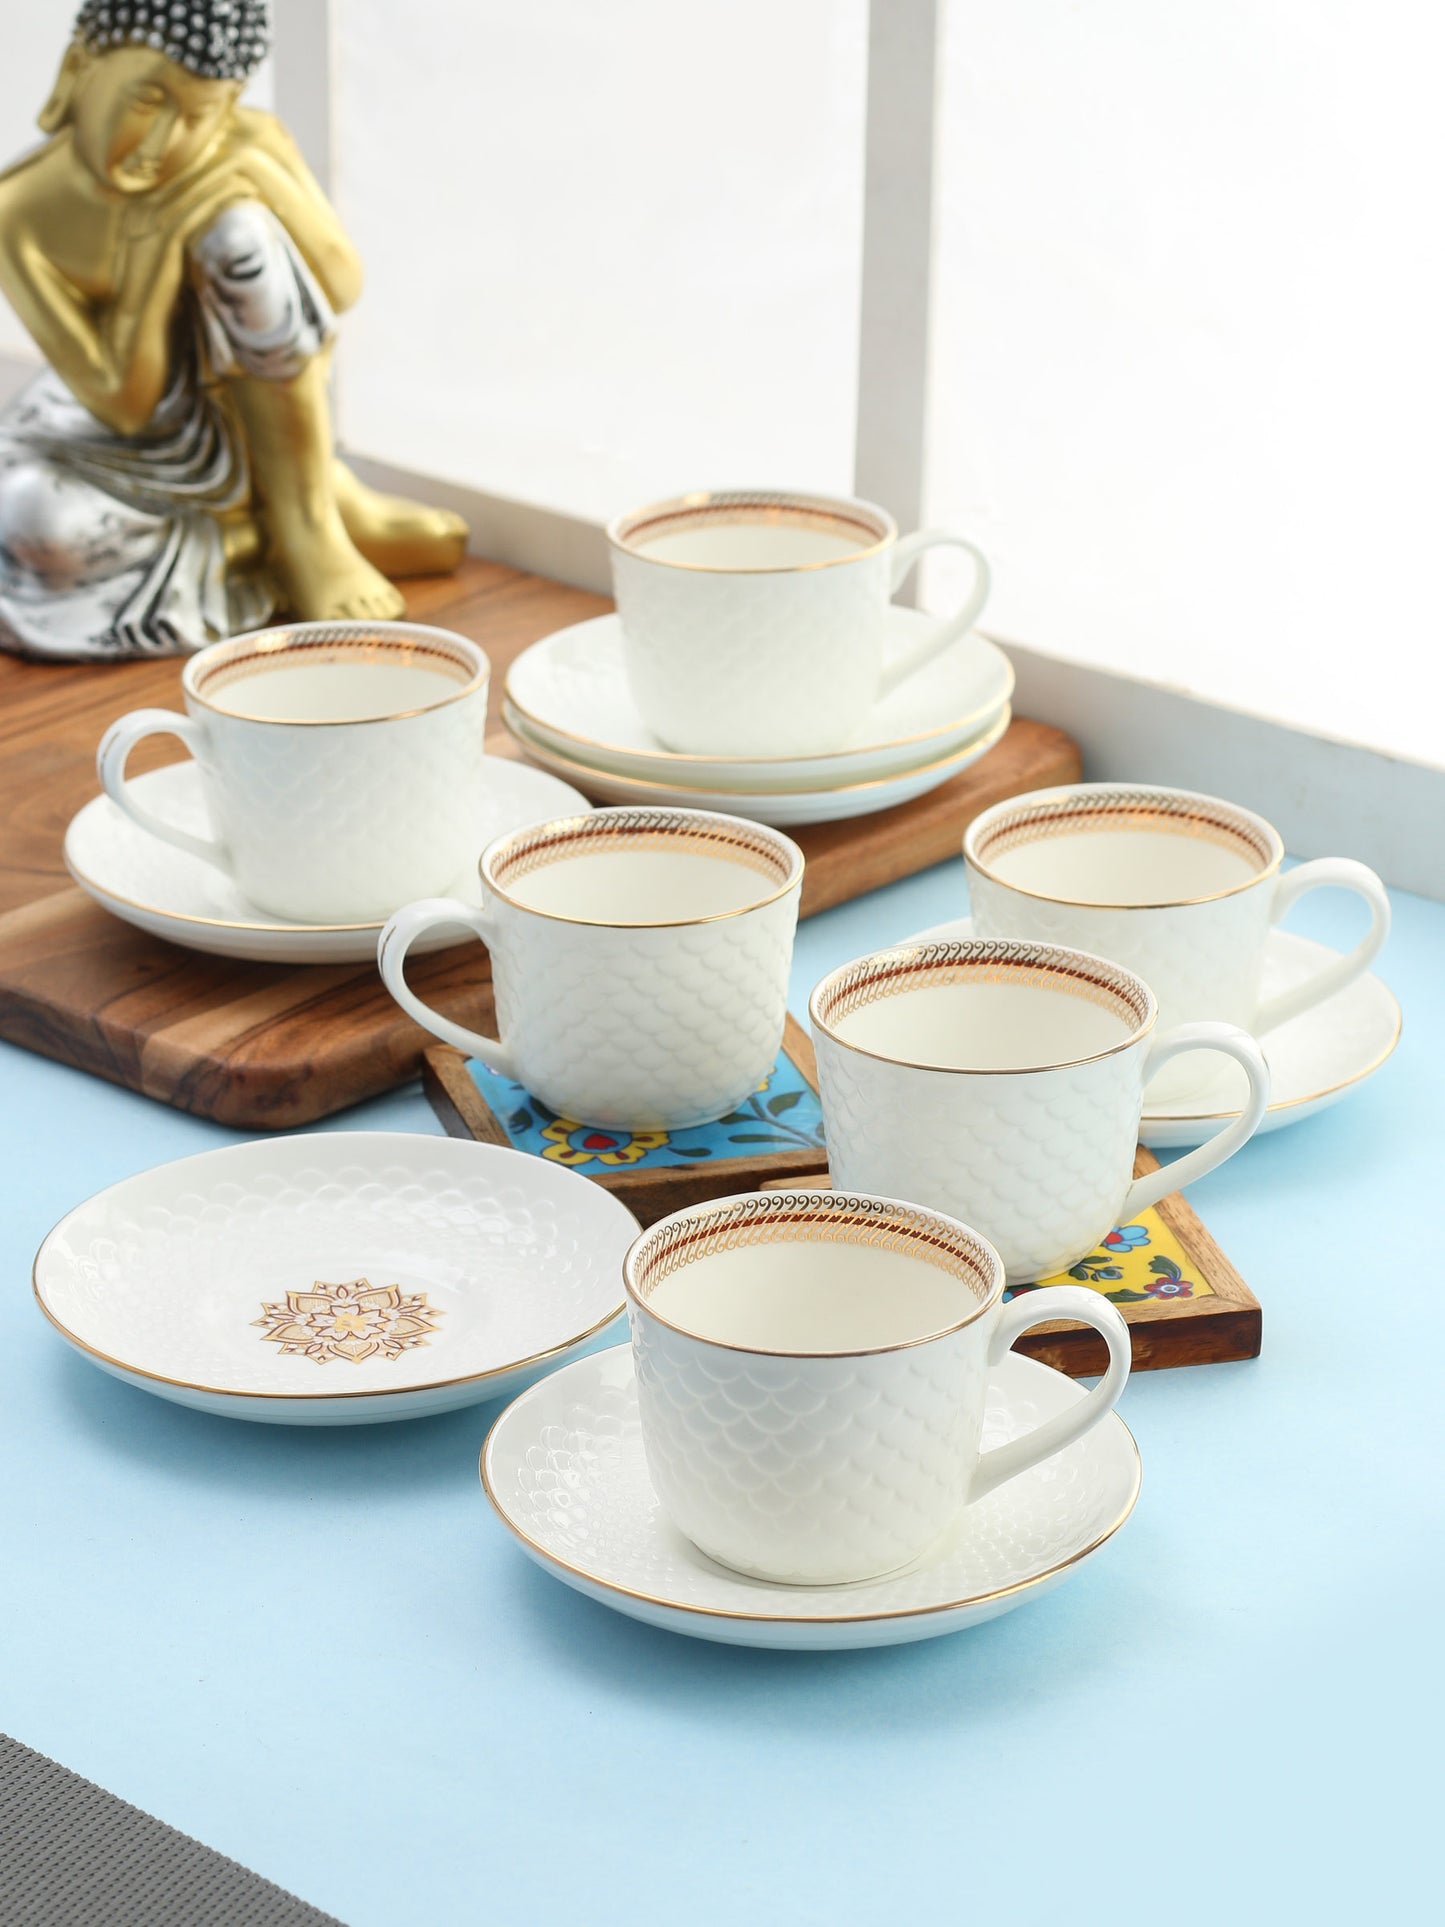 Ripple Impression Cup & Saucer, 130ml, Set of 12 (6 Cups + 6 Saucers)